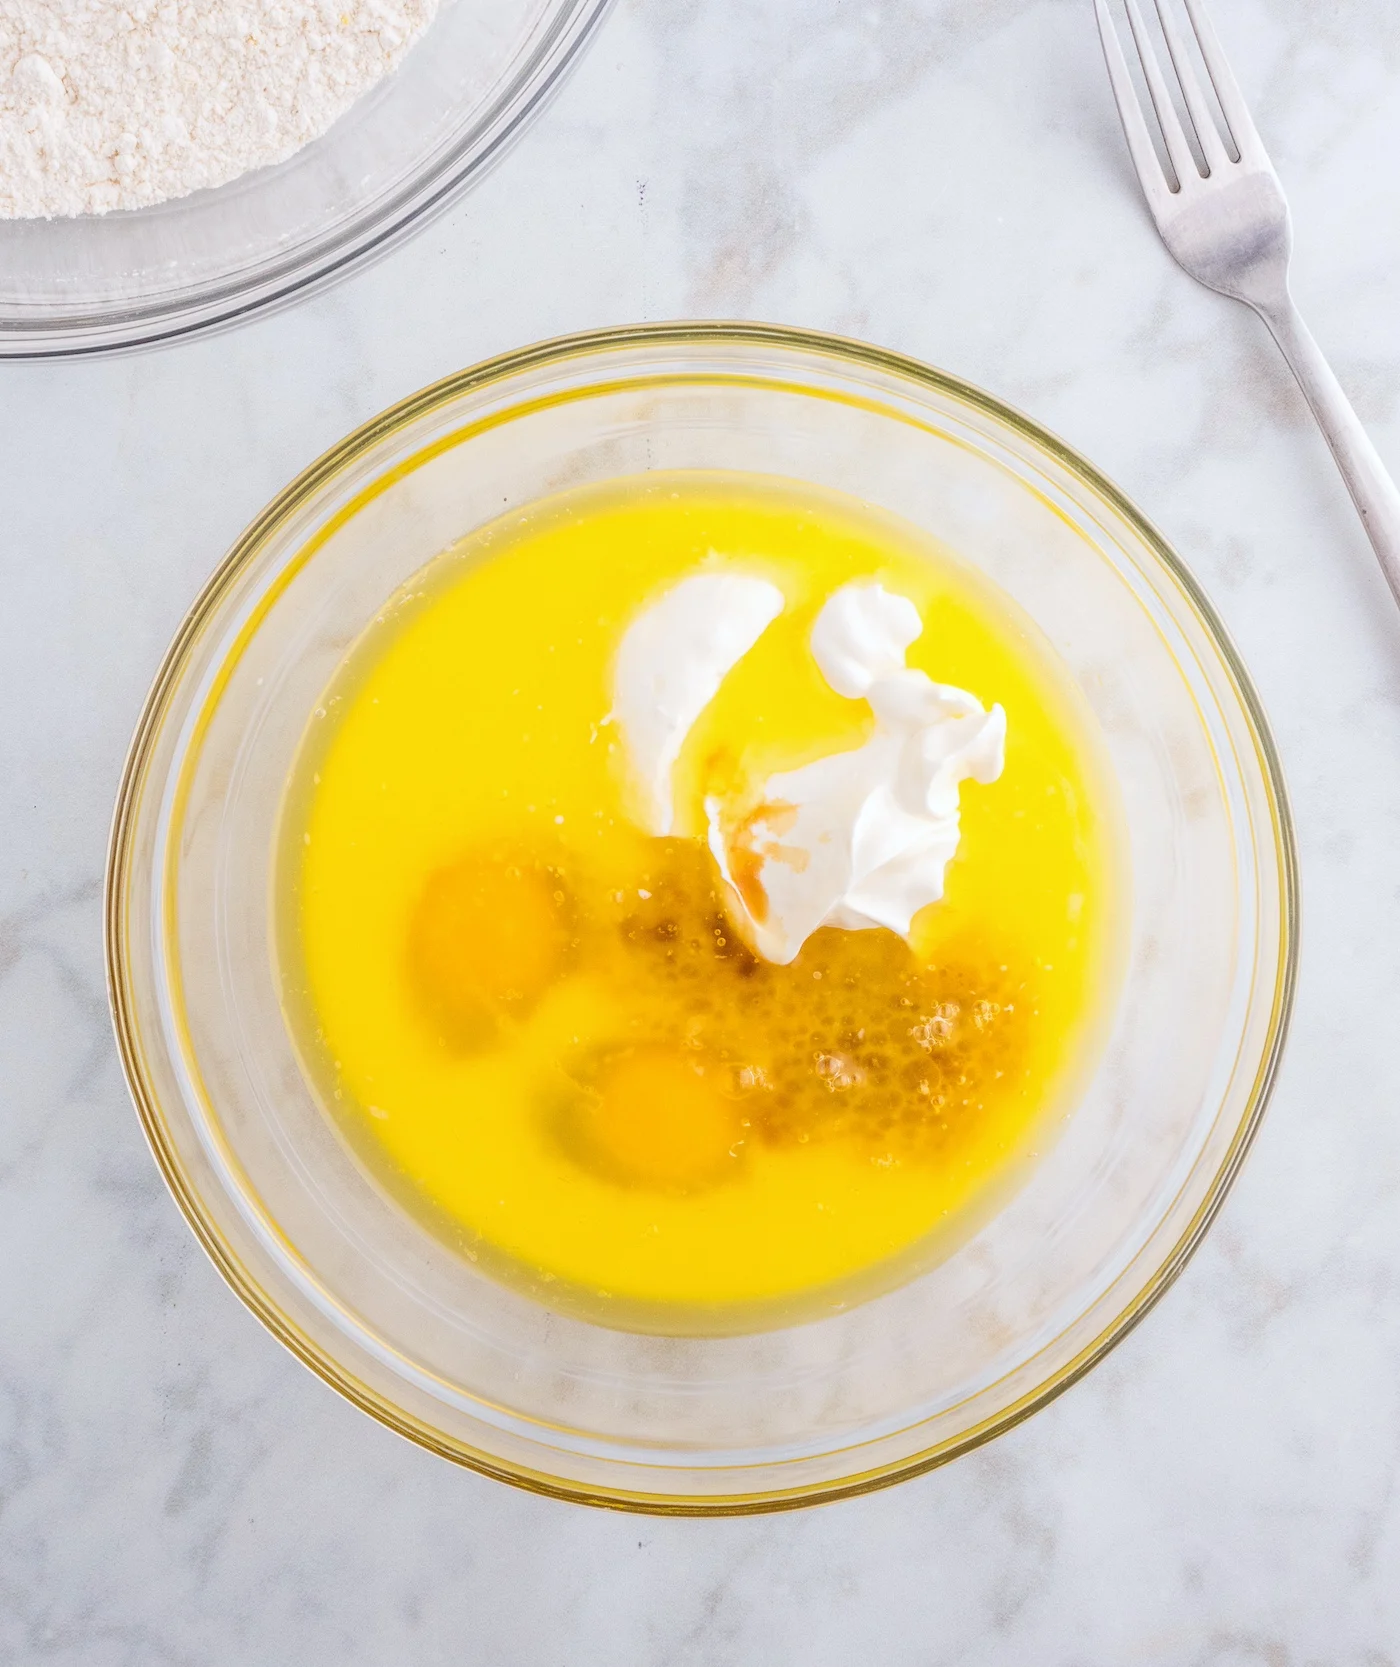 whisk together the melted butter, eggs, sour cream, milk, and vanilla extract